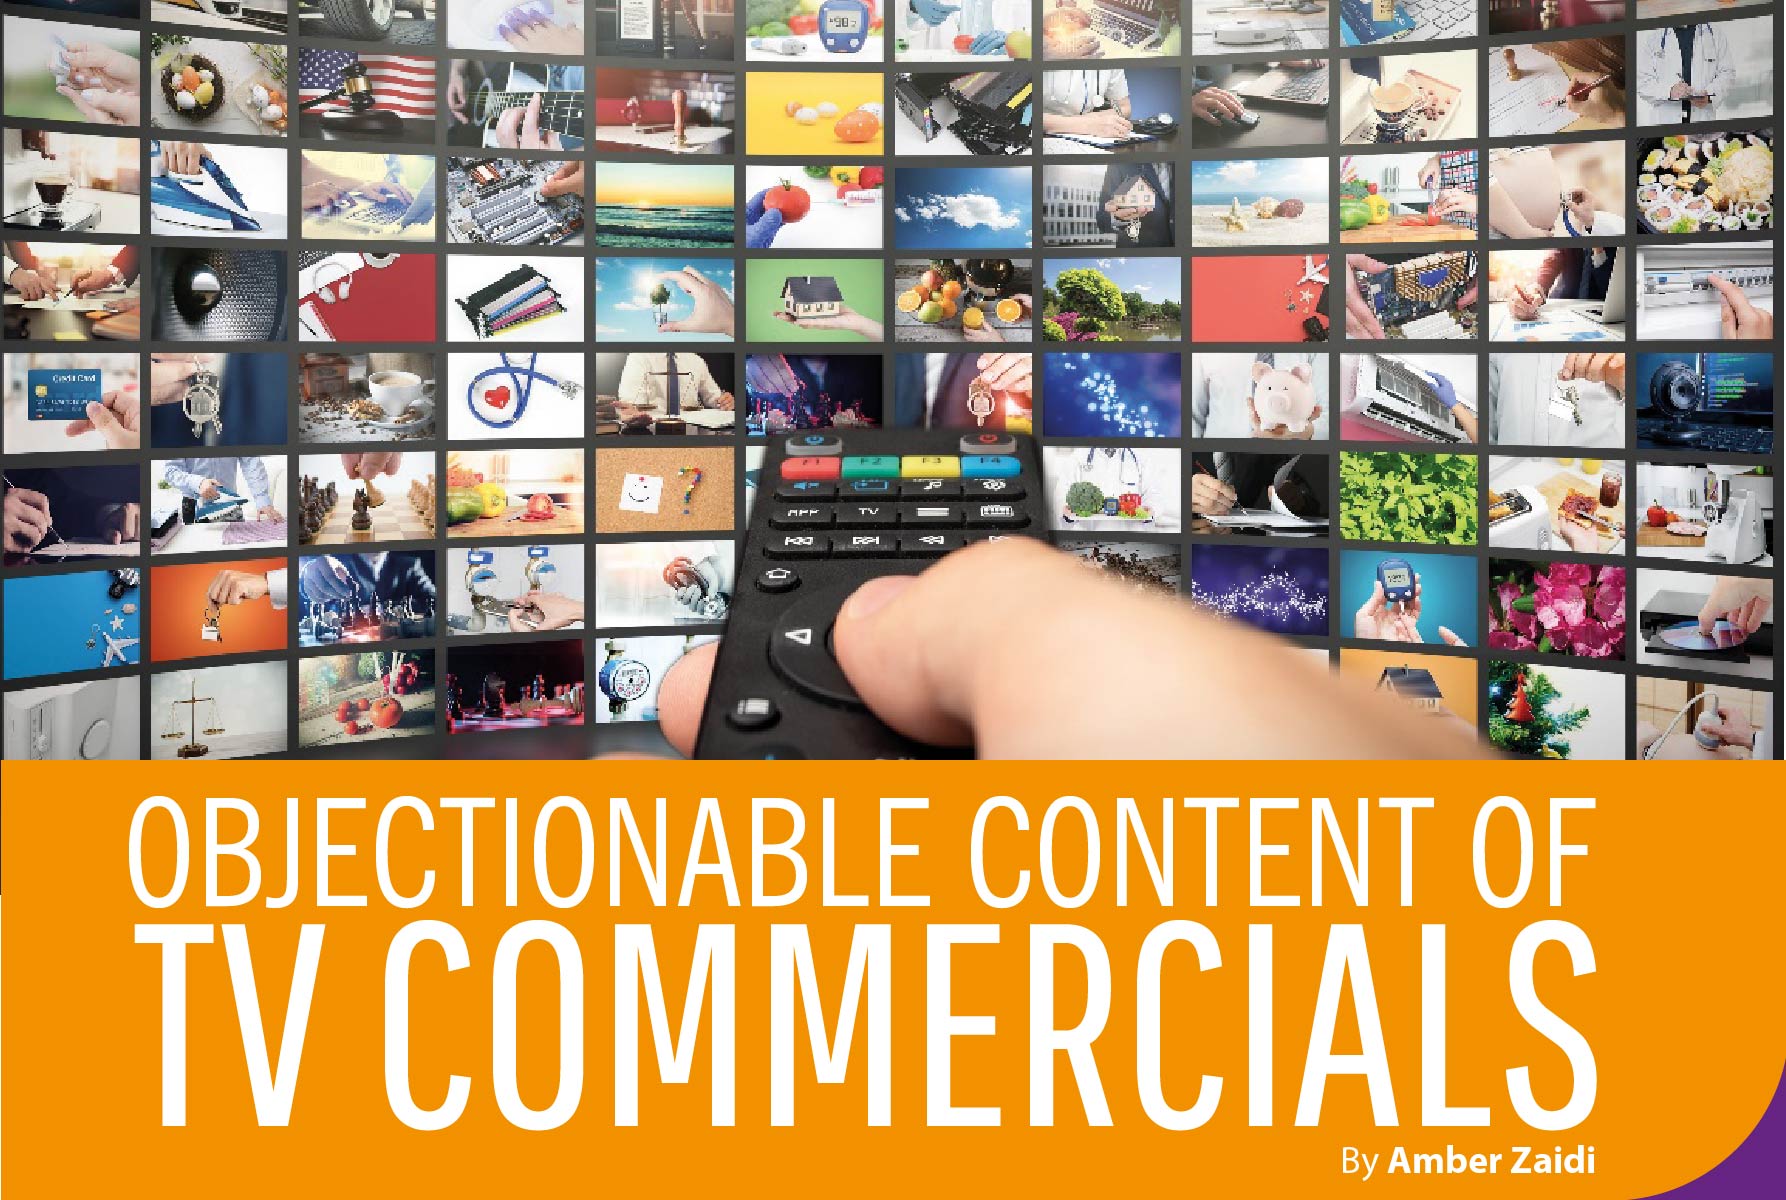 OBJECTIONABLE CONTENT OF TV COMMERCIALS